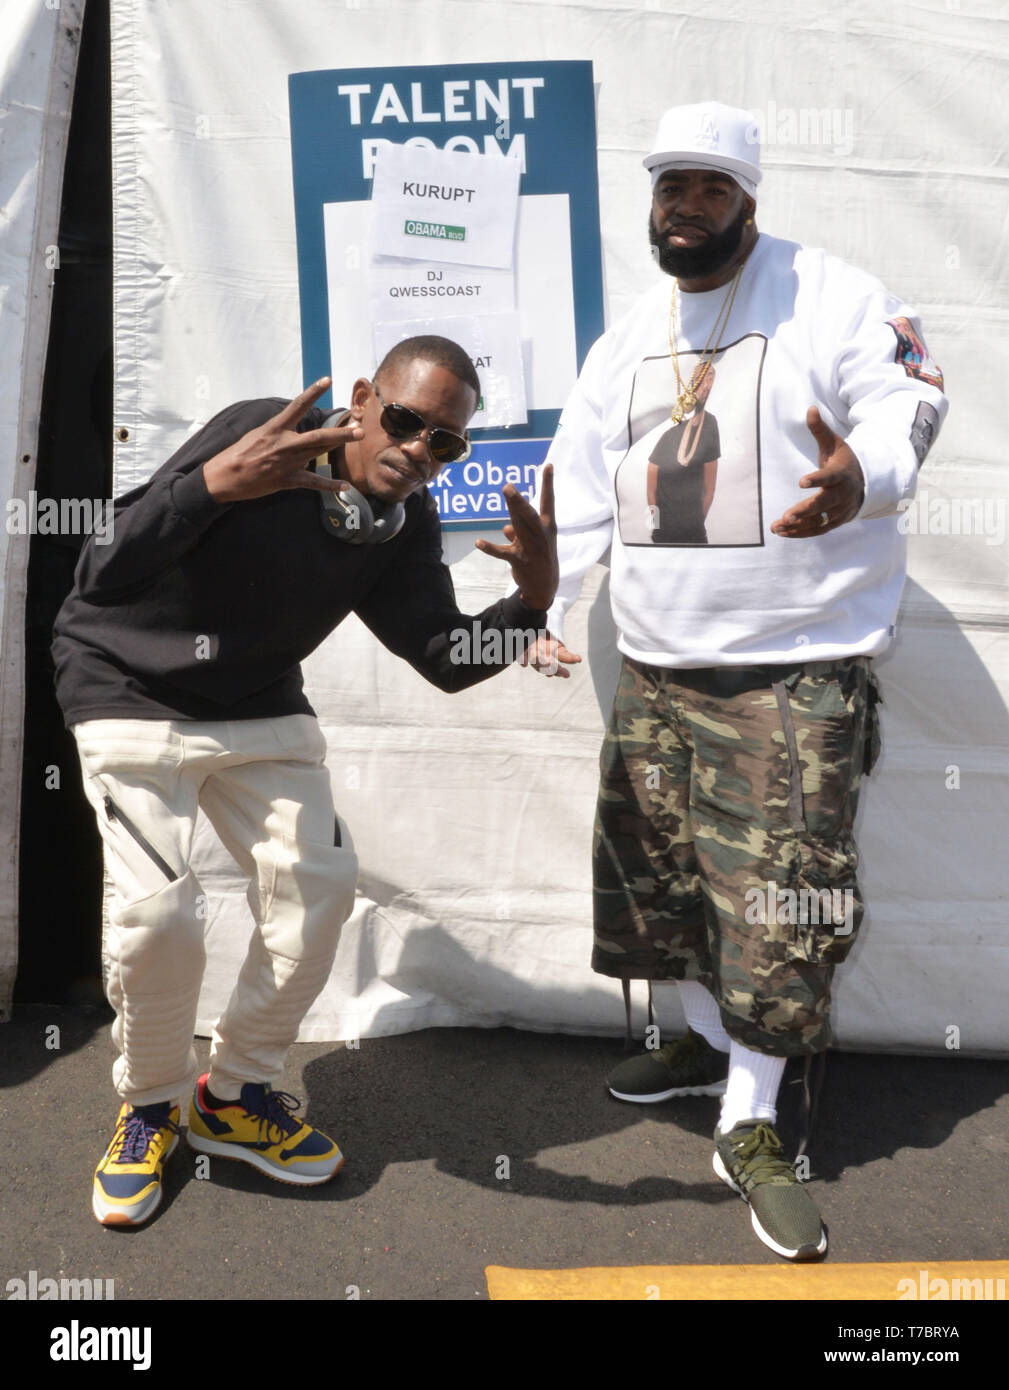 Los Angeles, Ca, USA. 4th May, 2019. Kurupt, DJ BattleCat at The City Of Los Angeles Officially Unveils Obama Boulevard In Honor Of The 44th President Of The United States Of America in Los Angeles, California on May 3, 2019. Credit: Koi Sojer/Snap'n U Photos/Media Punch/Alamy Live News Stock Photo